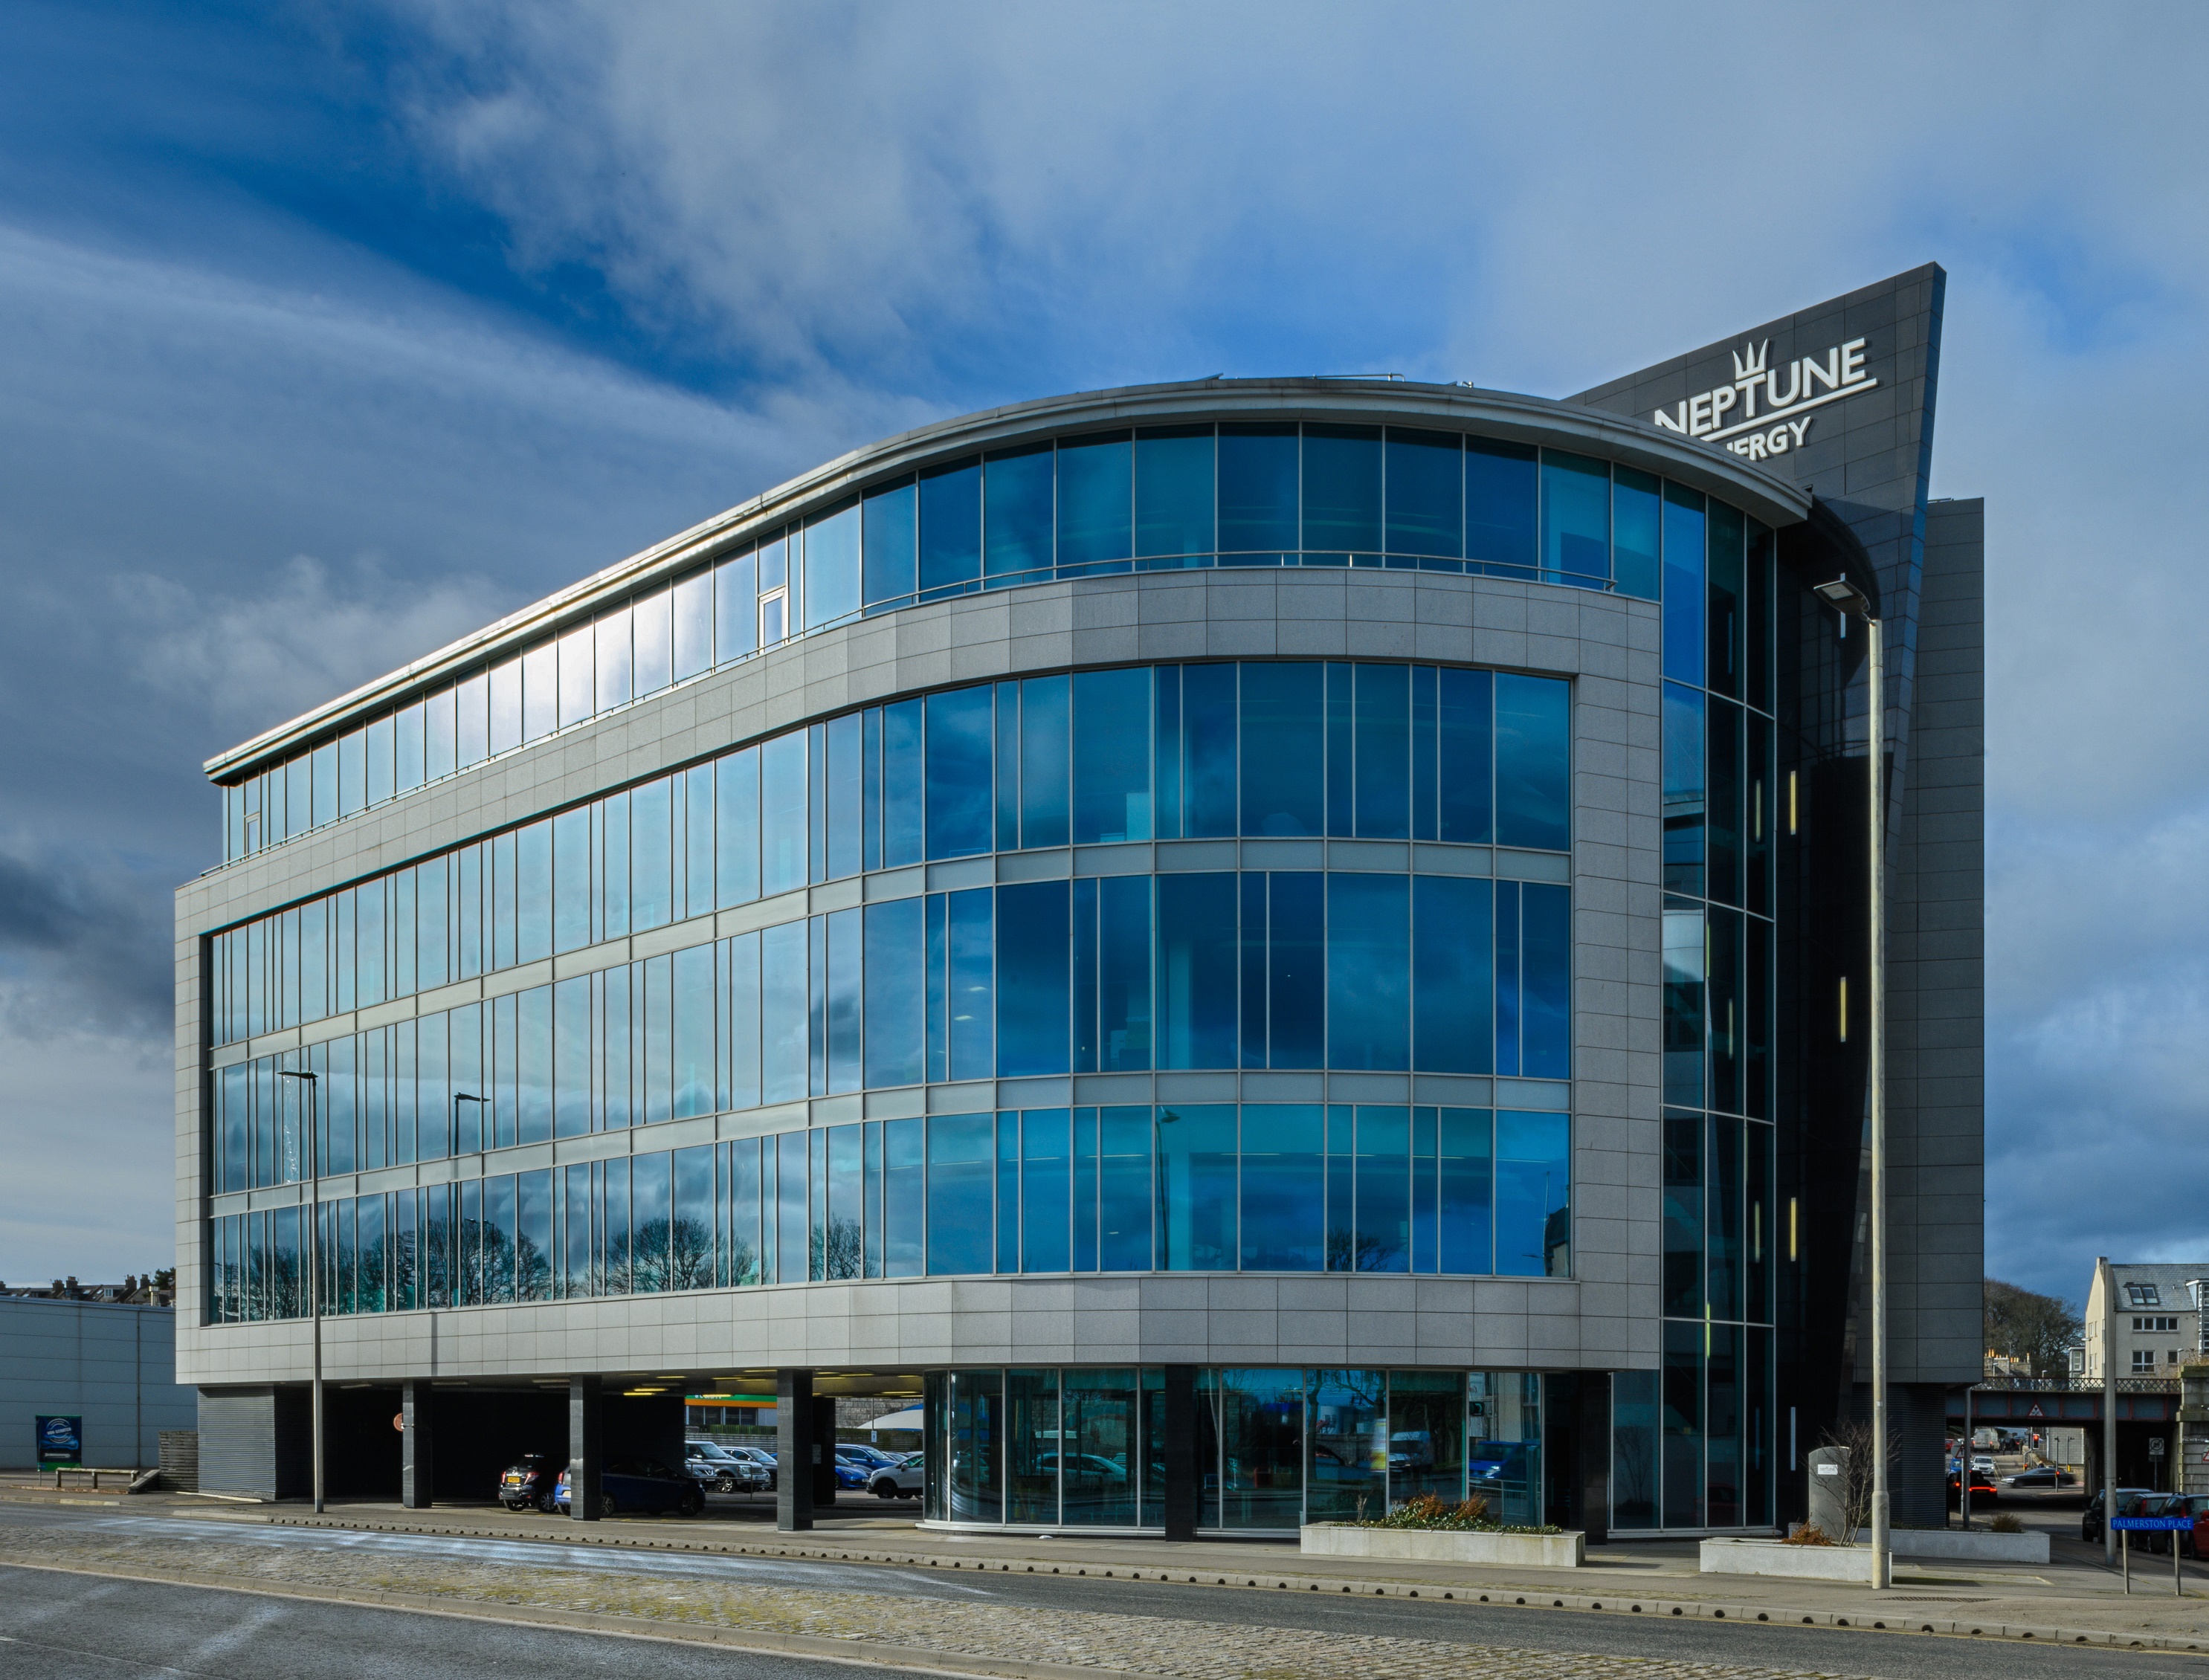 Neptune Energy’s Aberdeen HQ sold in city’s biggest office deal since pandemic began